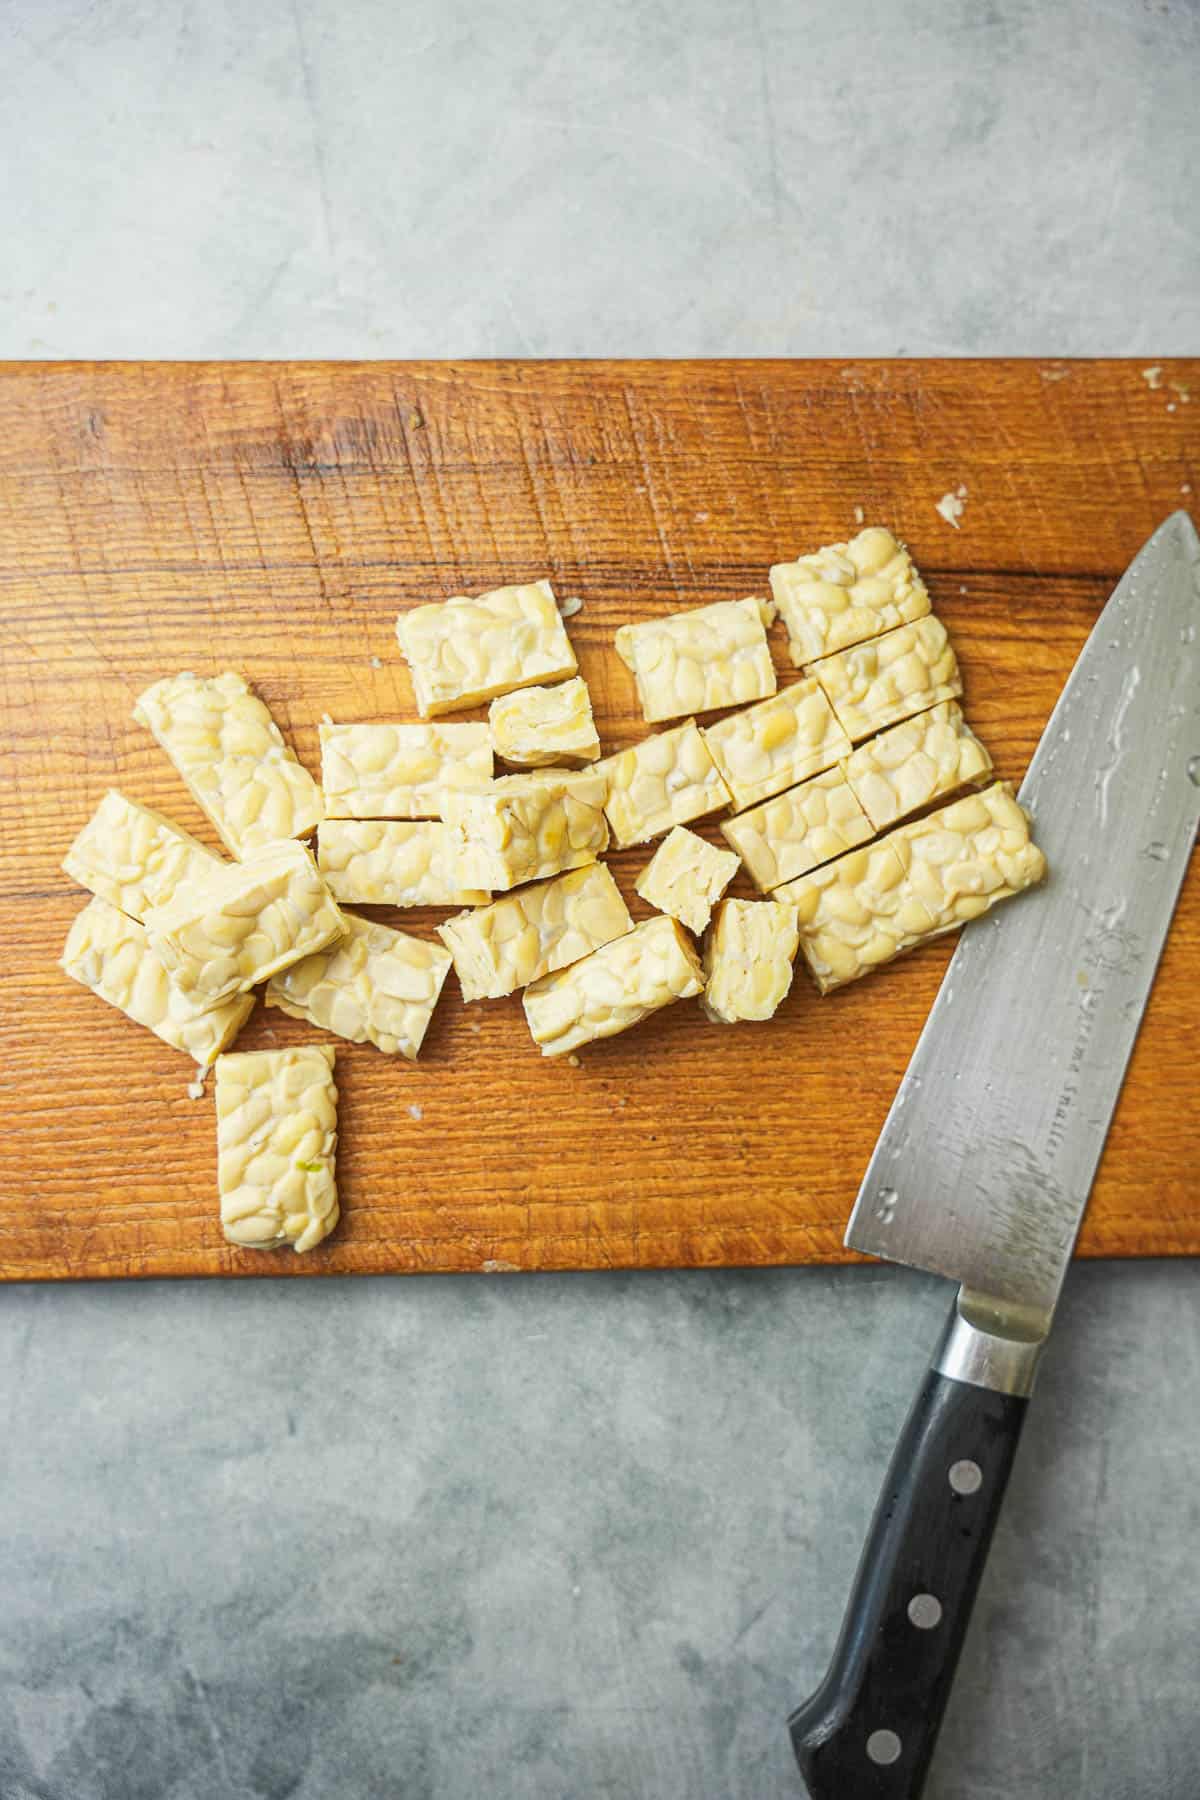 Tempeh cut into bite sized pieces on a wooden cutting board with a sharp knife.